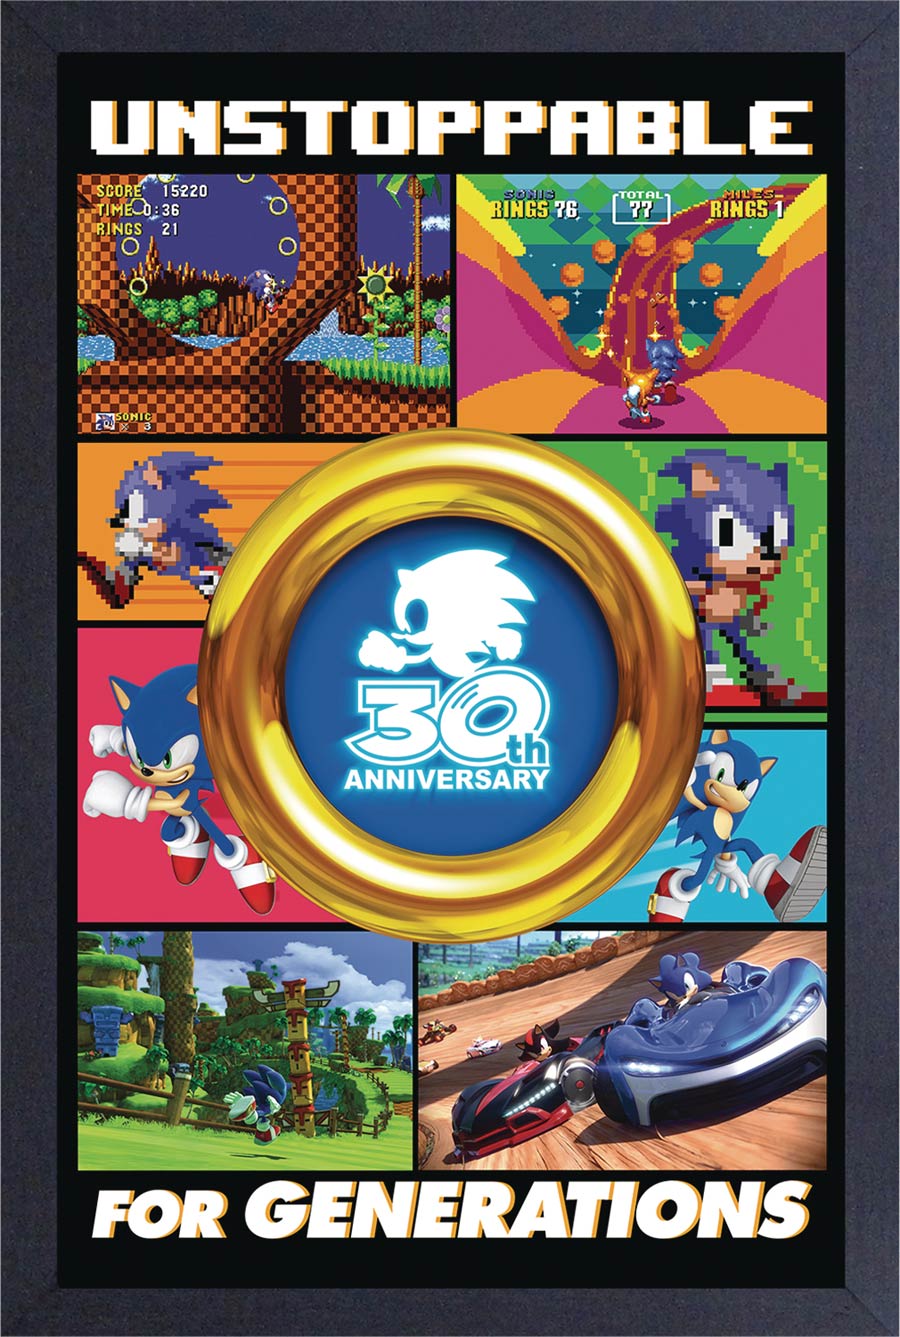 Sonic The Hedgehog 30th Anniversary 11x17 Framed Print - Unstoppable Gold Ring